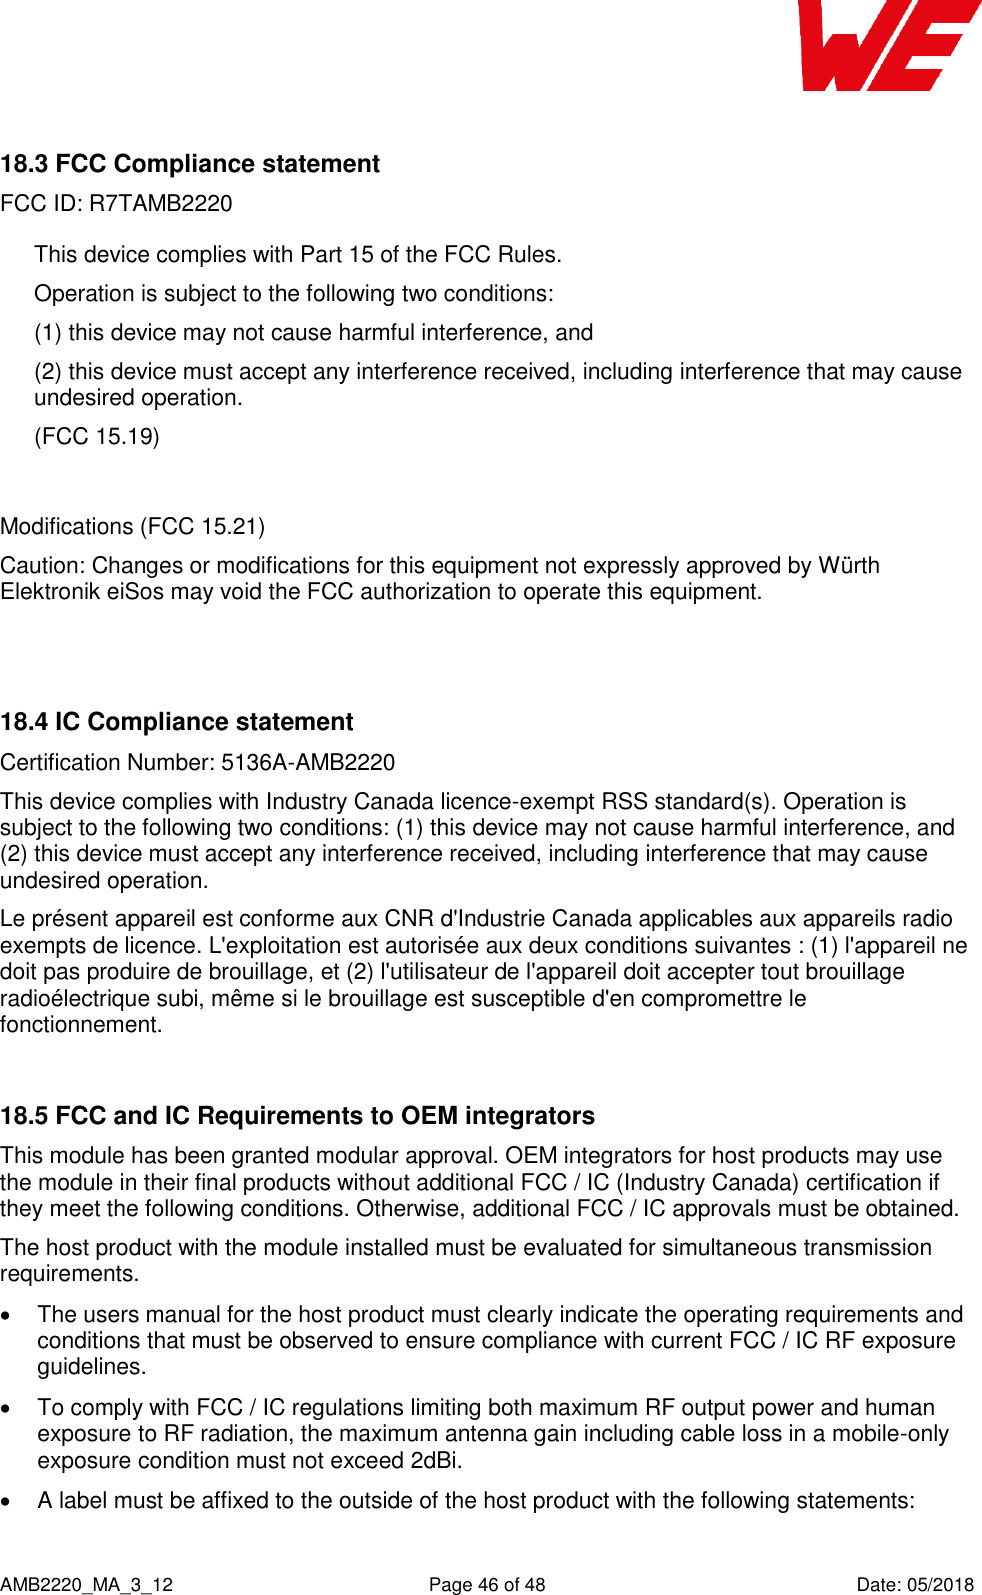    AMB2220_MA_3_12  Page 46 of 48  Date: 05/2018 18.3 FCC Compliance statement FCC ID: R7TAMB2220  This device complies with Part 15 of the FCC Rules.  Operation is subject to the following two conditions:  (1) this device may not cause harmful interference, and  (2) this device must accept any interference received, including interference that may cause undesired operation.  (FCC 15.19)  Modifications (FCC 15.21) Caution: Changes or modifications for this equipment not expressly approved by Würth Elektronik eiSos may void the FCC authorization to operate this equipment.   18.4 IC Compliance statement Certification Number: 5136A-AMB2220 This device complies with Industry Canada licence-exempt RSS standard(s). Operation is subject to the following two conditions: (1) this device may not cause harmful interference, and (2) this device must accept any interference received, including interference that may cause undesired operation. Le présent appareil est conforme aux CNR d&apos;Industrie Canada applicables aux appareils radio exempts de licence. L&apos;exploitation est autorisée aux deux conditions suivantes : (1) l&apos;appareil ne doit pas produire de brouillage, et (2) l&apos;utilisateur de l&apos;appareil doit accepter tout brouillage radioélectrique subi, même si le brouillage est susceptible d&apos;en compromettre le fonctionnement.  18.5 FCC and IC Requirements to OEM integrators This module has been granted modular approval. OEM integrators for host products may use the module in their final products without additional FCC / IC (Industry Canada) certification if they meet the following conditions. Otherwise, additional FCC / IC approvals must be obtained. The host product with the module installed must be evaluated for simultaneous transmission requirements.    The users manual for the host product must clearly indicate the operating requirements and conditions that must be observed to ensure compliance with current FCC / IC RF exposure guidelines.    To comply with FCC / IC regulations limiting both maximum RF output power and human exposure to RF radiation, the maximum antenna gain including cable loss in a mobile-only exposure condition must not exceed 2dBi.    A label must be affixed to the outside of the host product with the following statements:  